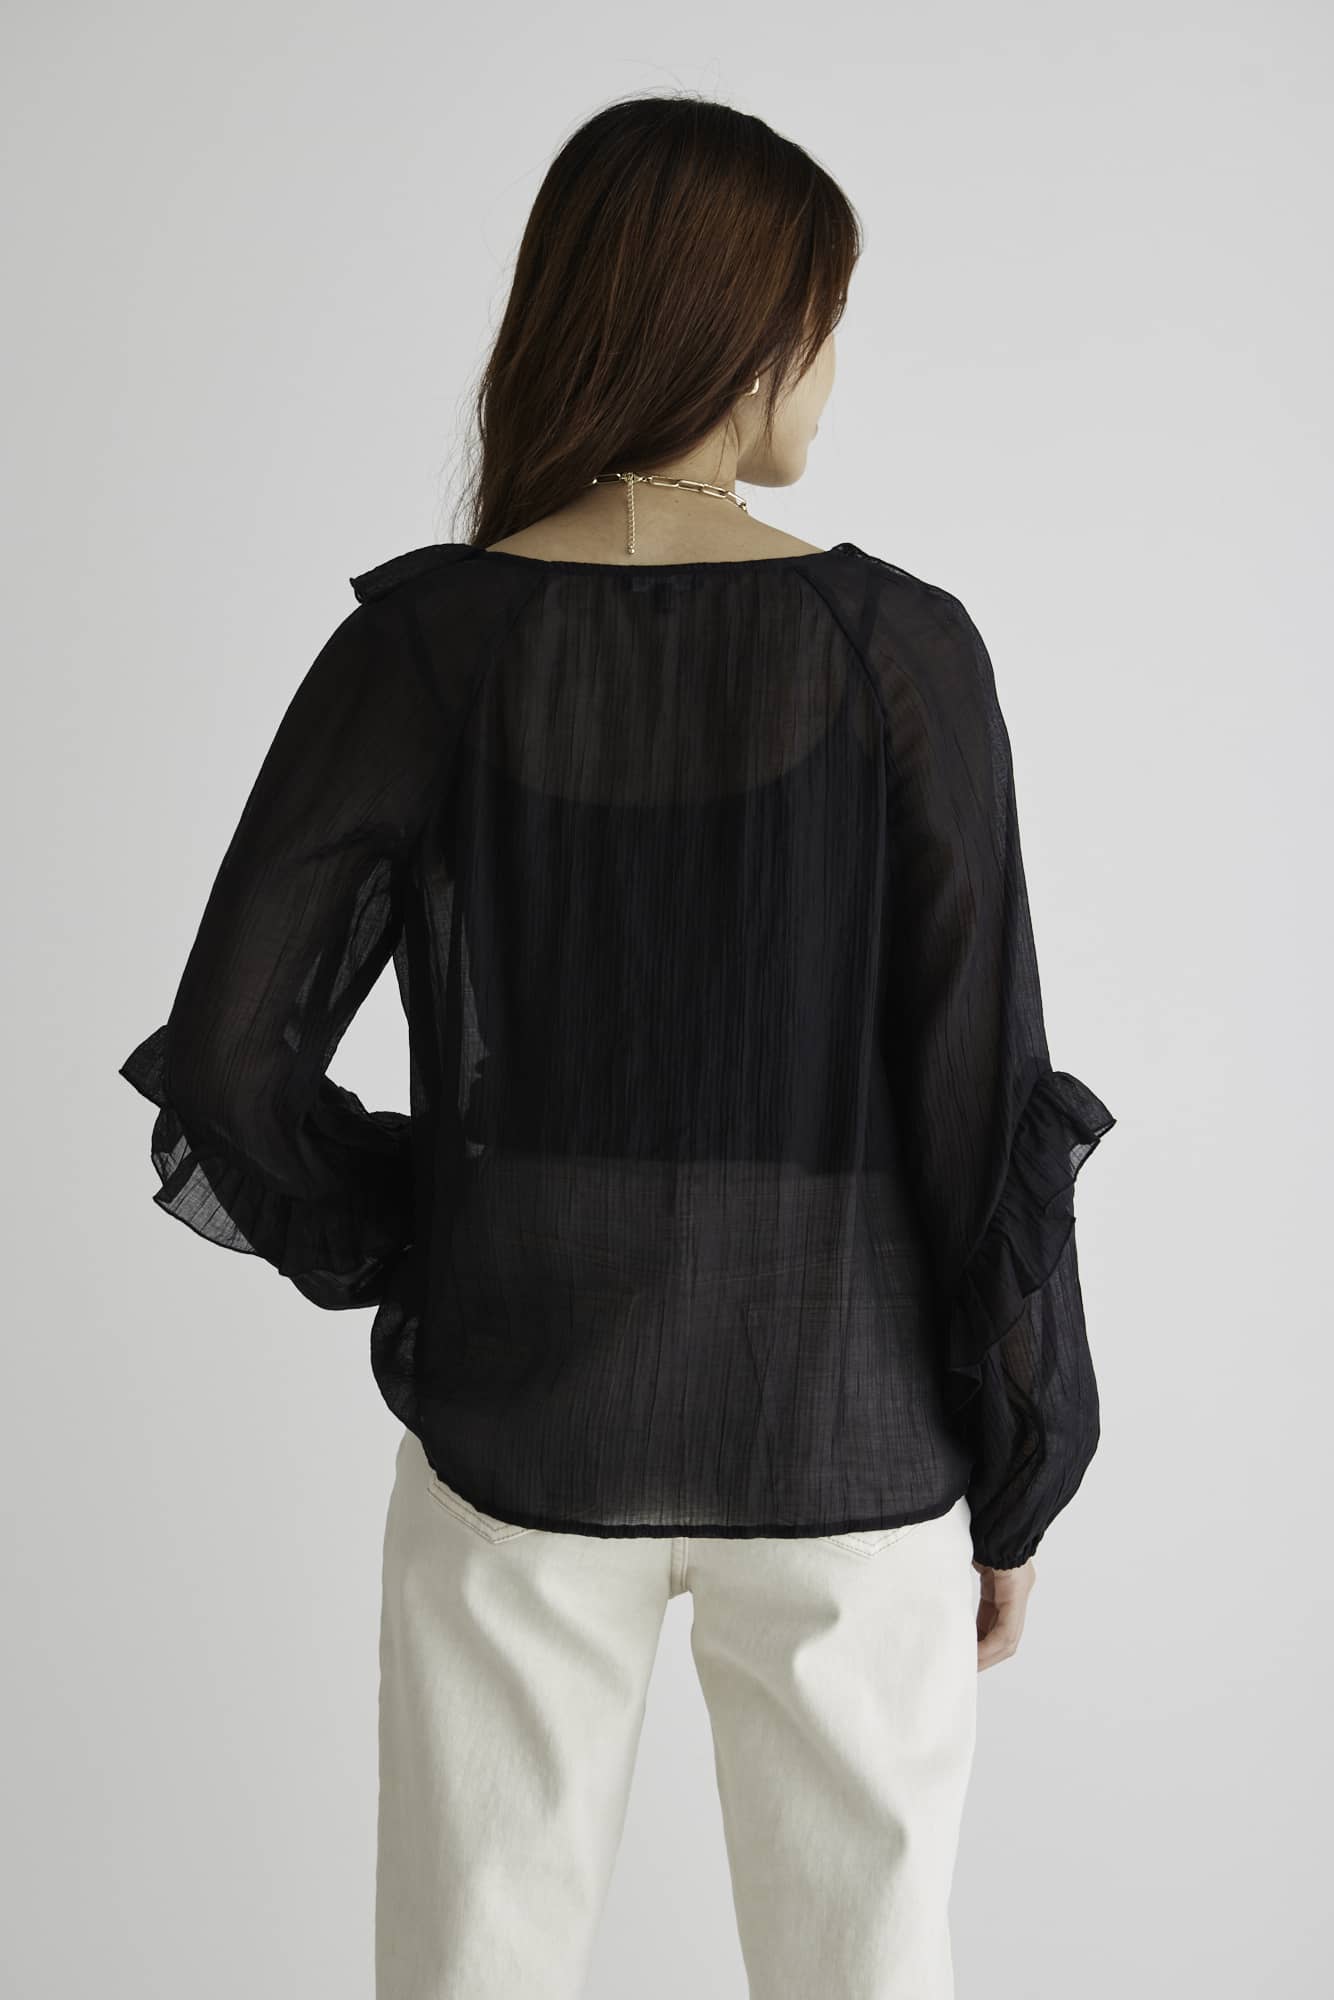 The Daily Sheer Textured Frill Top is available in classic black. It features a stunning neckline with frill and a tie details and lovely frill sleeves to match. A great wardrobe staple for when you just aren't sure what to wear !  Frill details Tie v neckline 90% Tencel, 10% Polyester